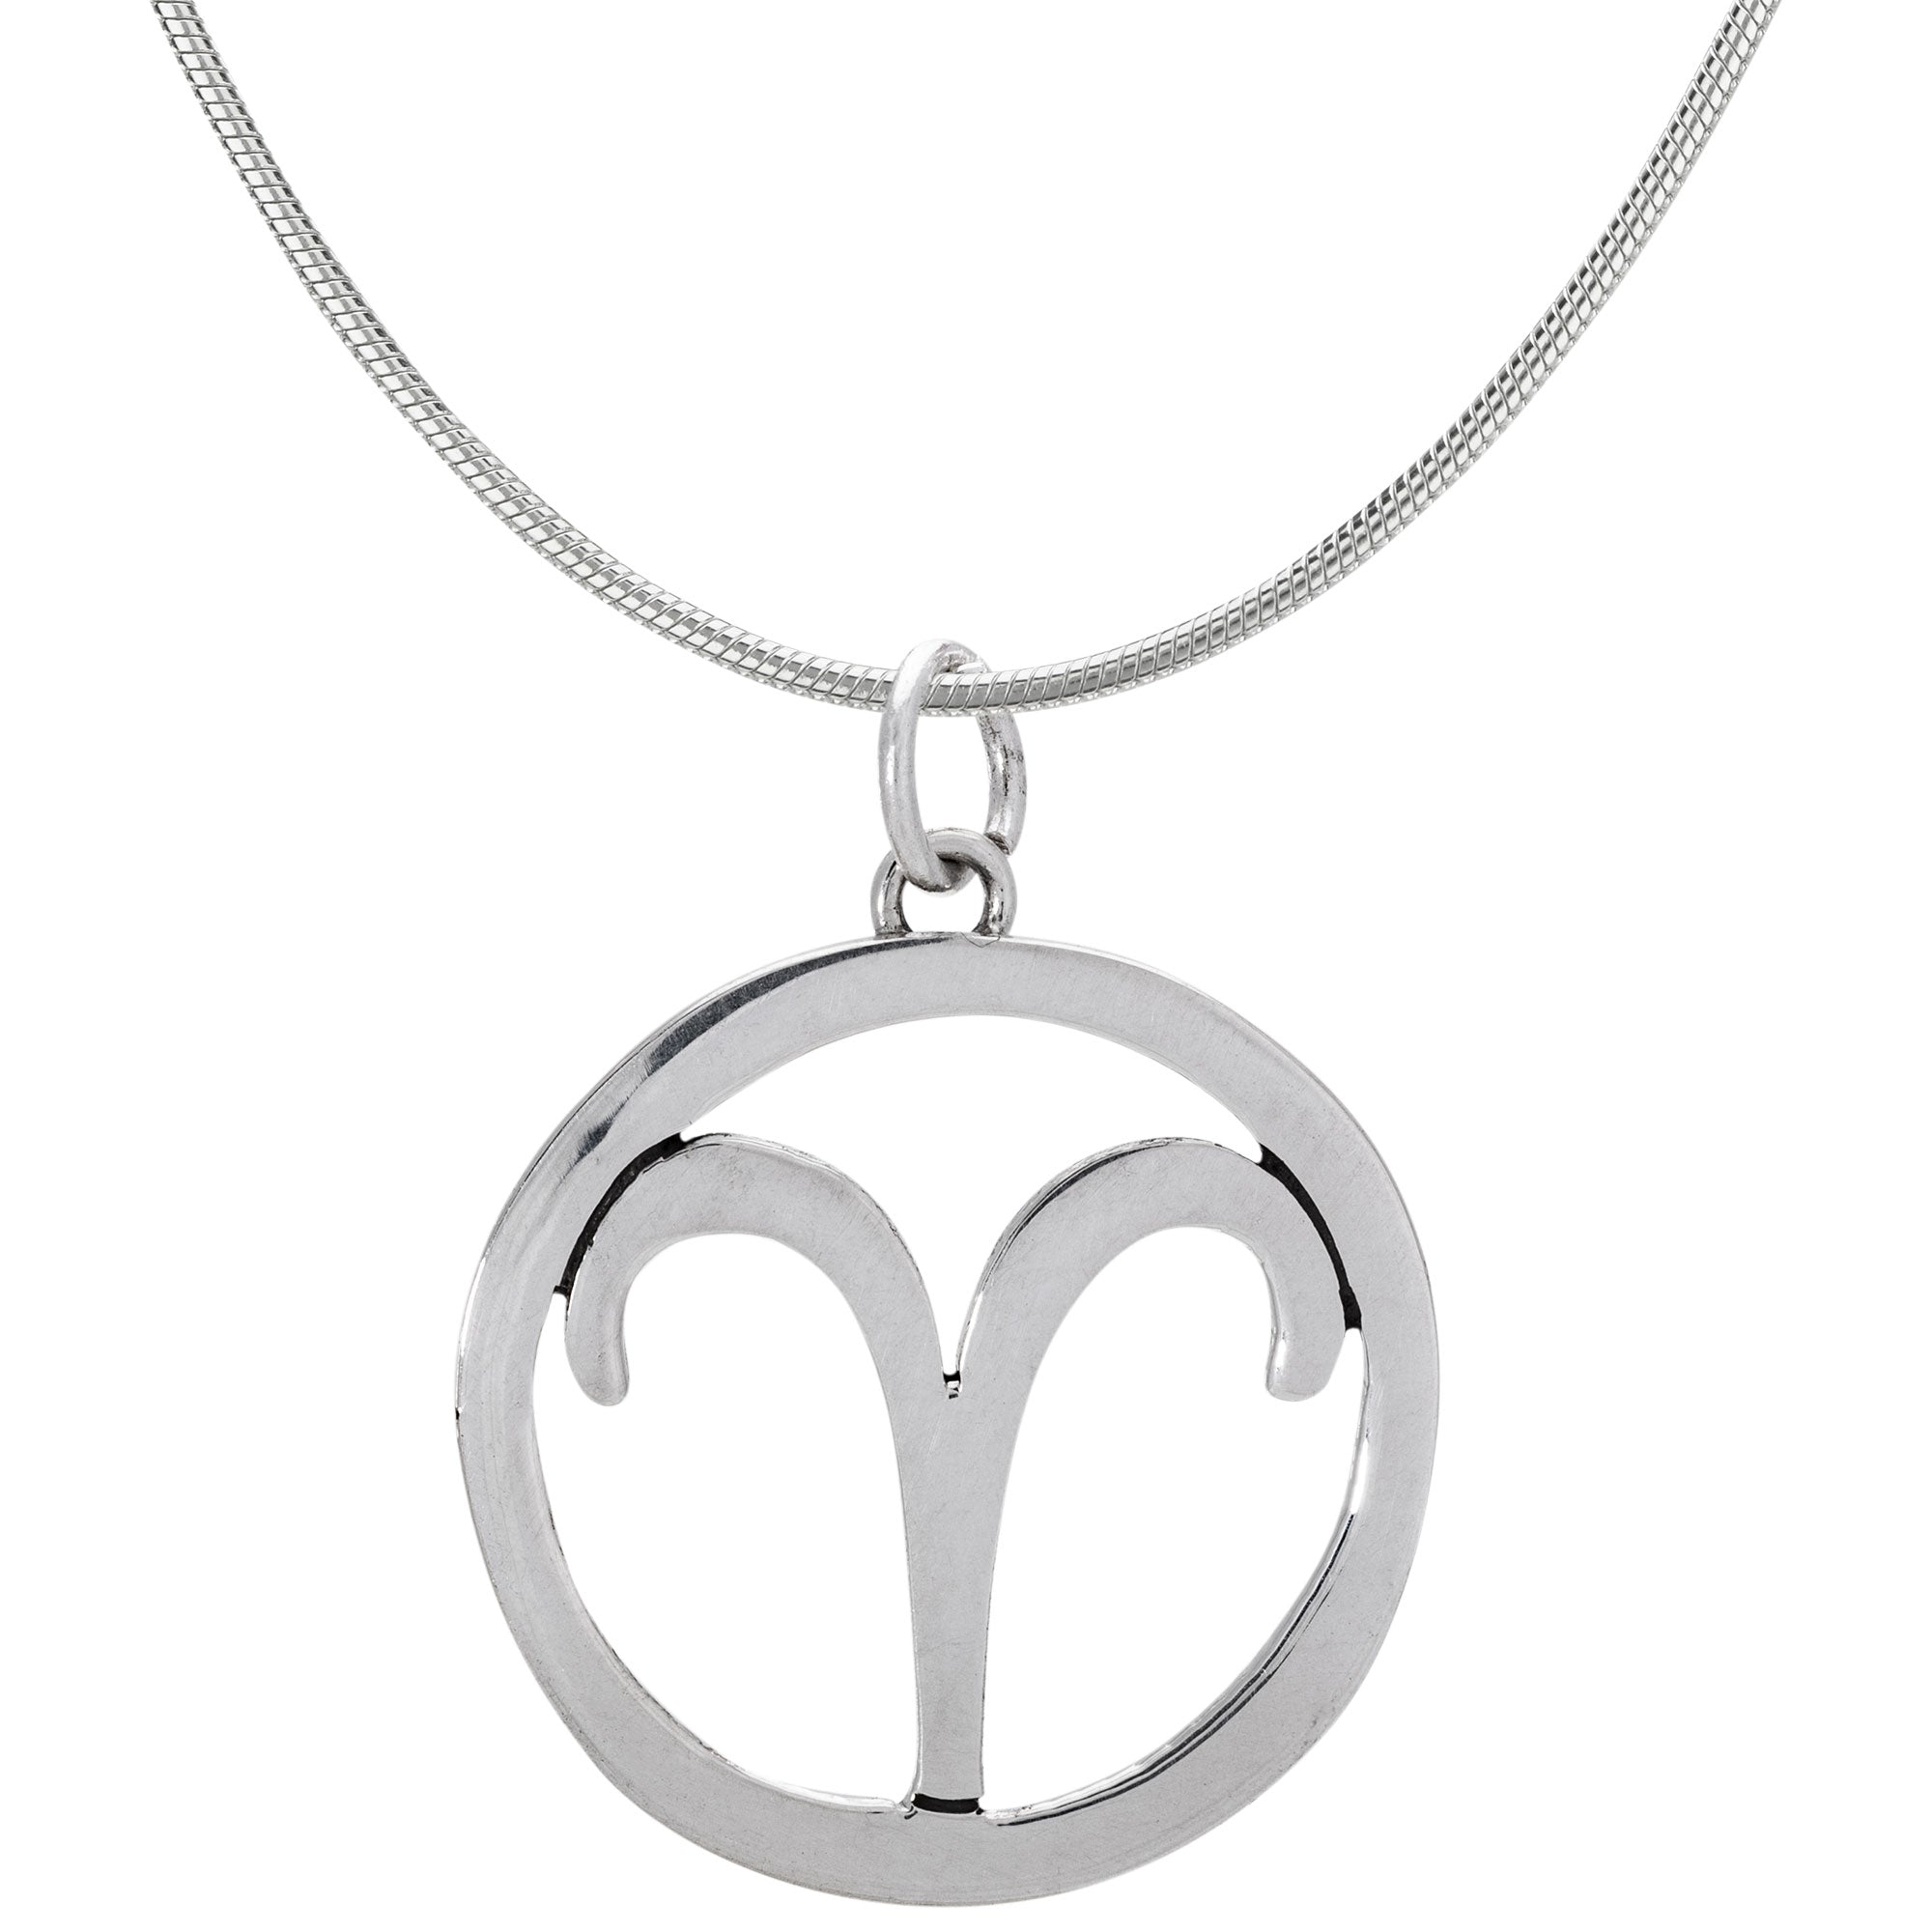 Zodiac Sign Astrology Necklace Collection - Gemini - With Snake Chain